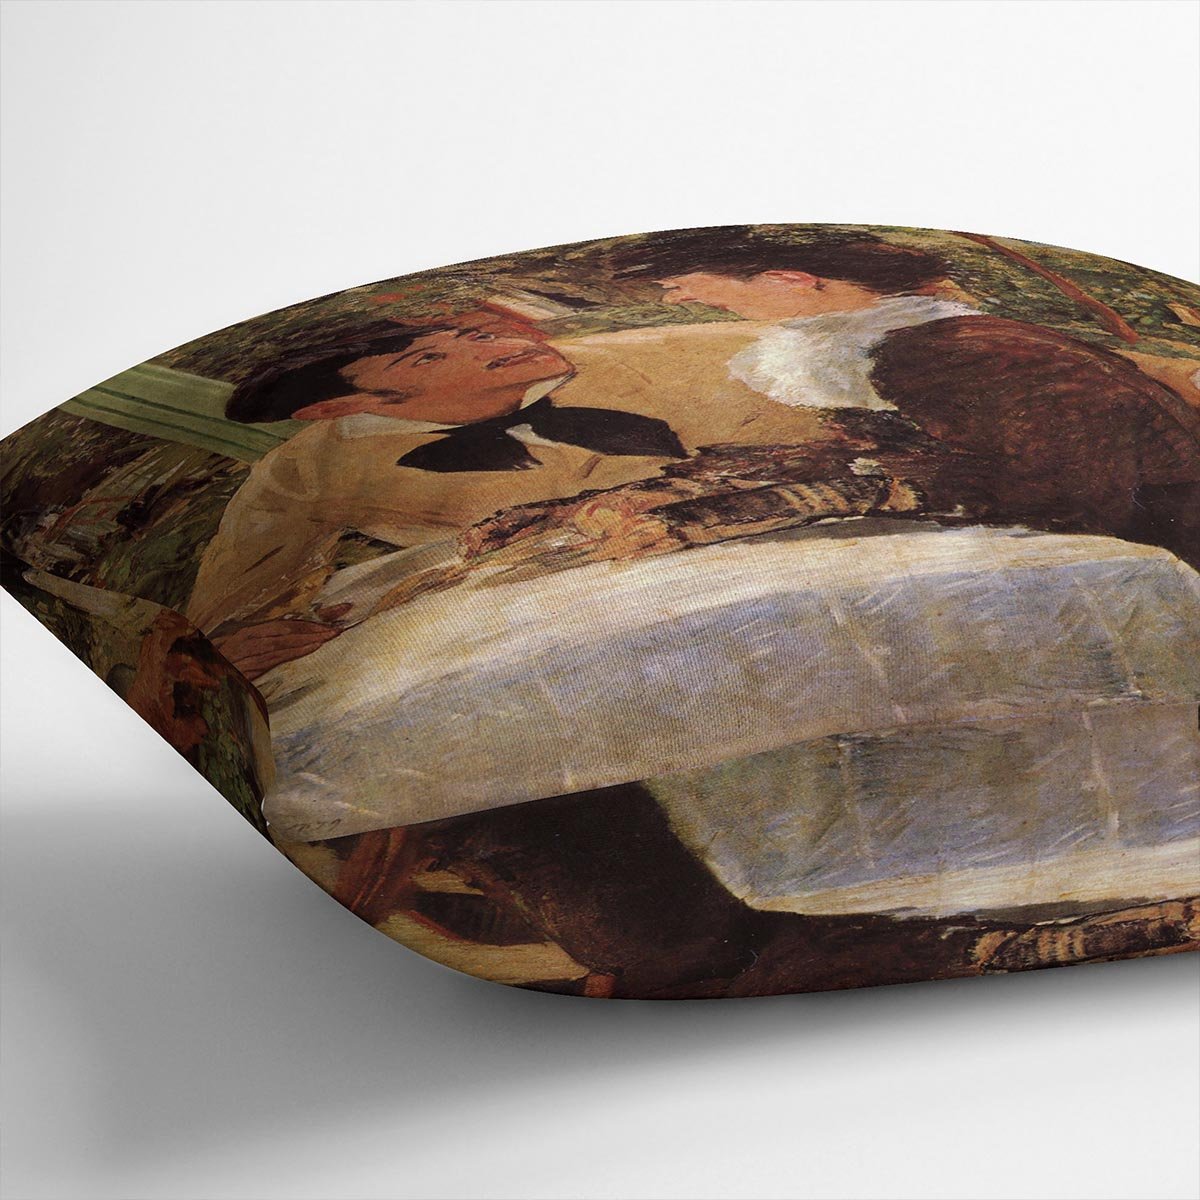 Pare Lathuille by Manet Throw Pillow